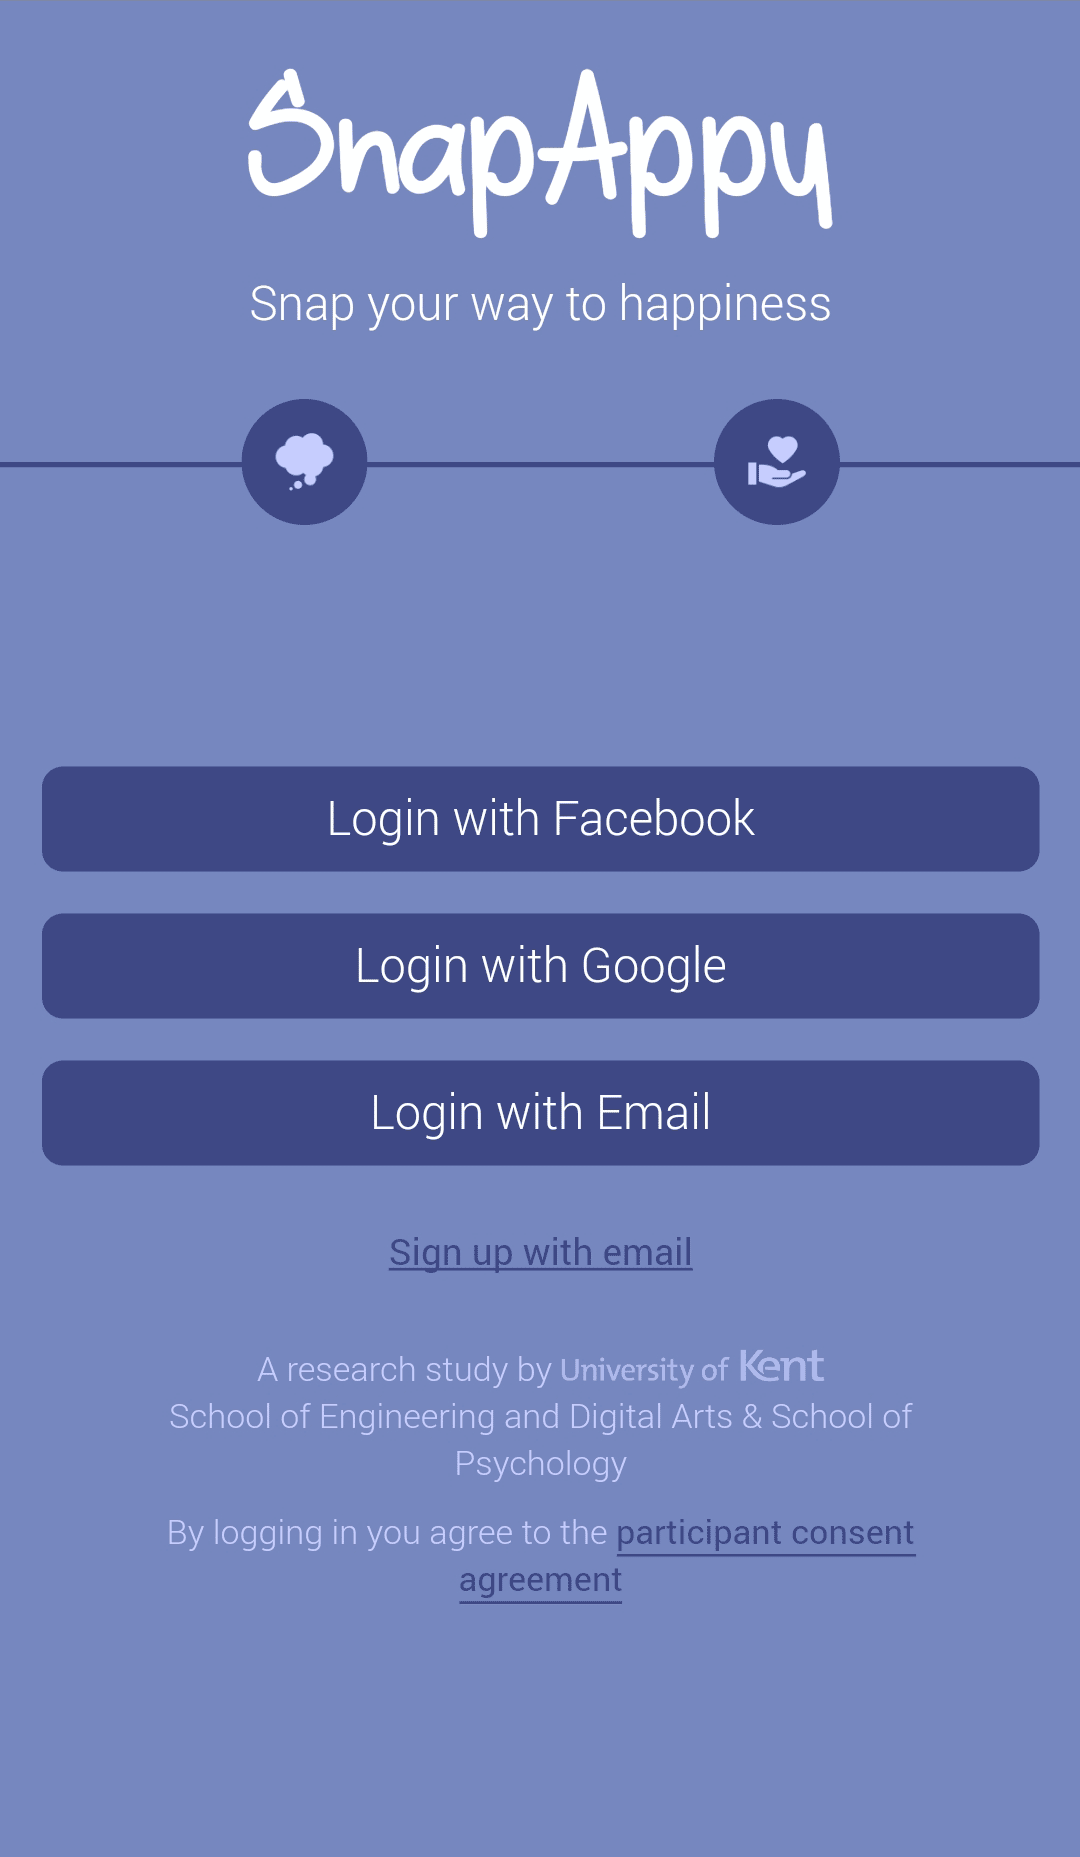 Login screen with the SnapAppy logo, login and sign up buttons.